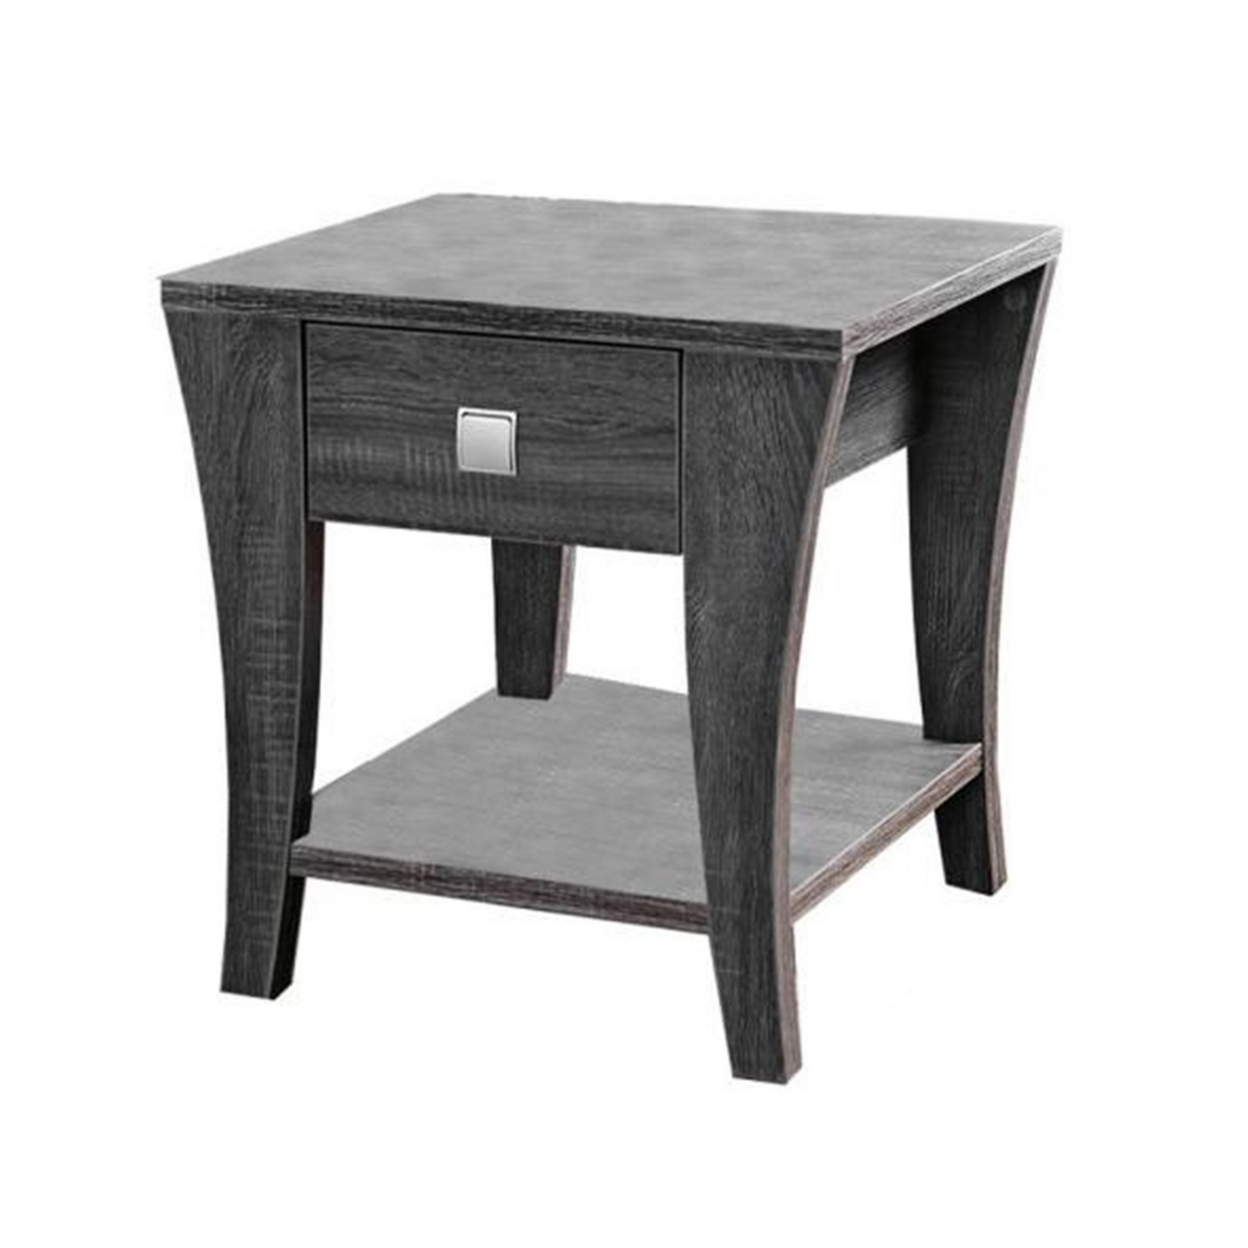 Wooden End Table With Swooping Curled Legs, Gray- Saltoro Sherpi